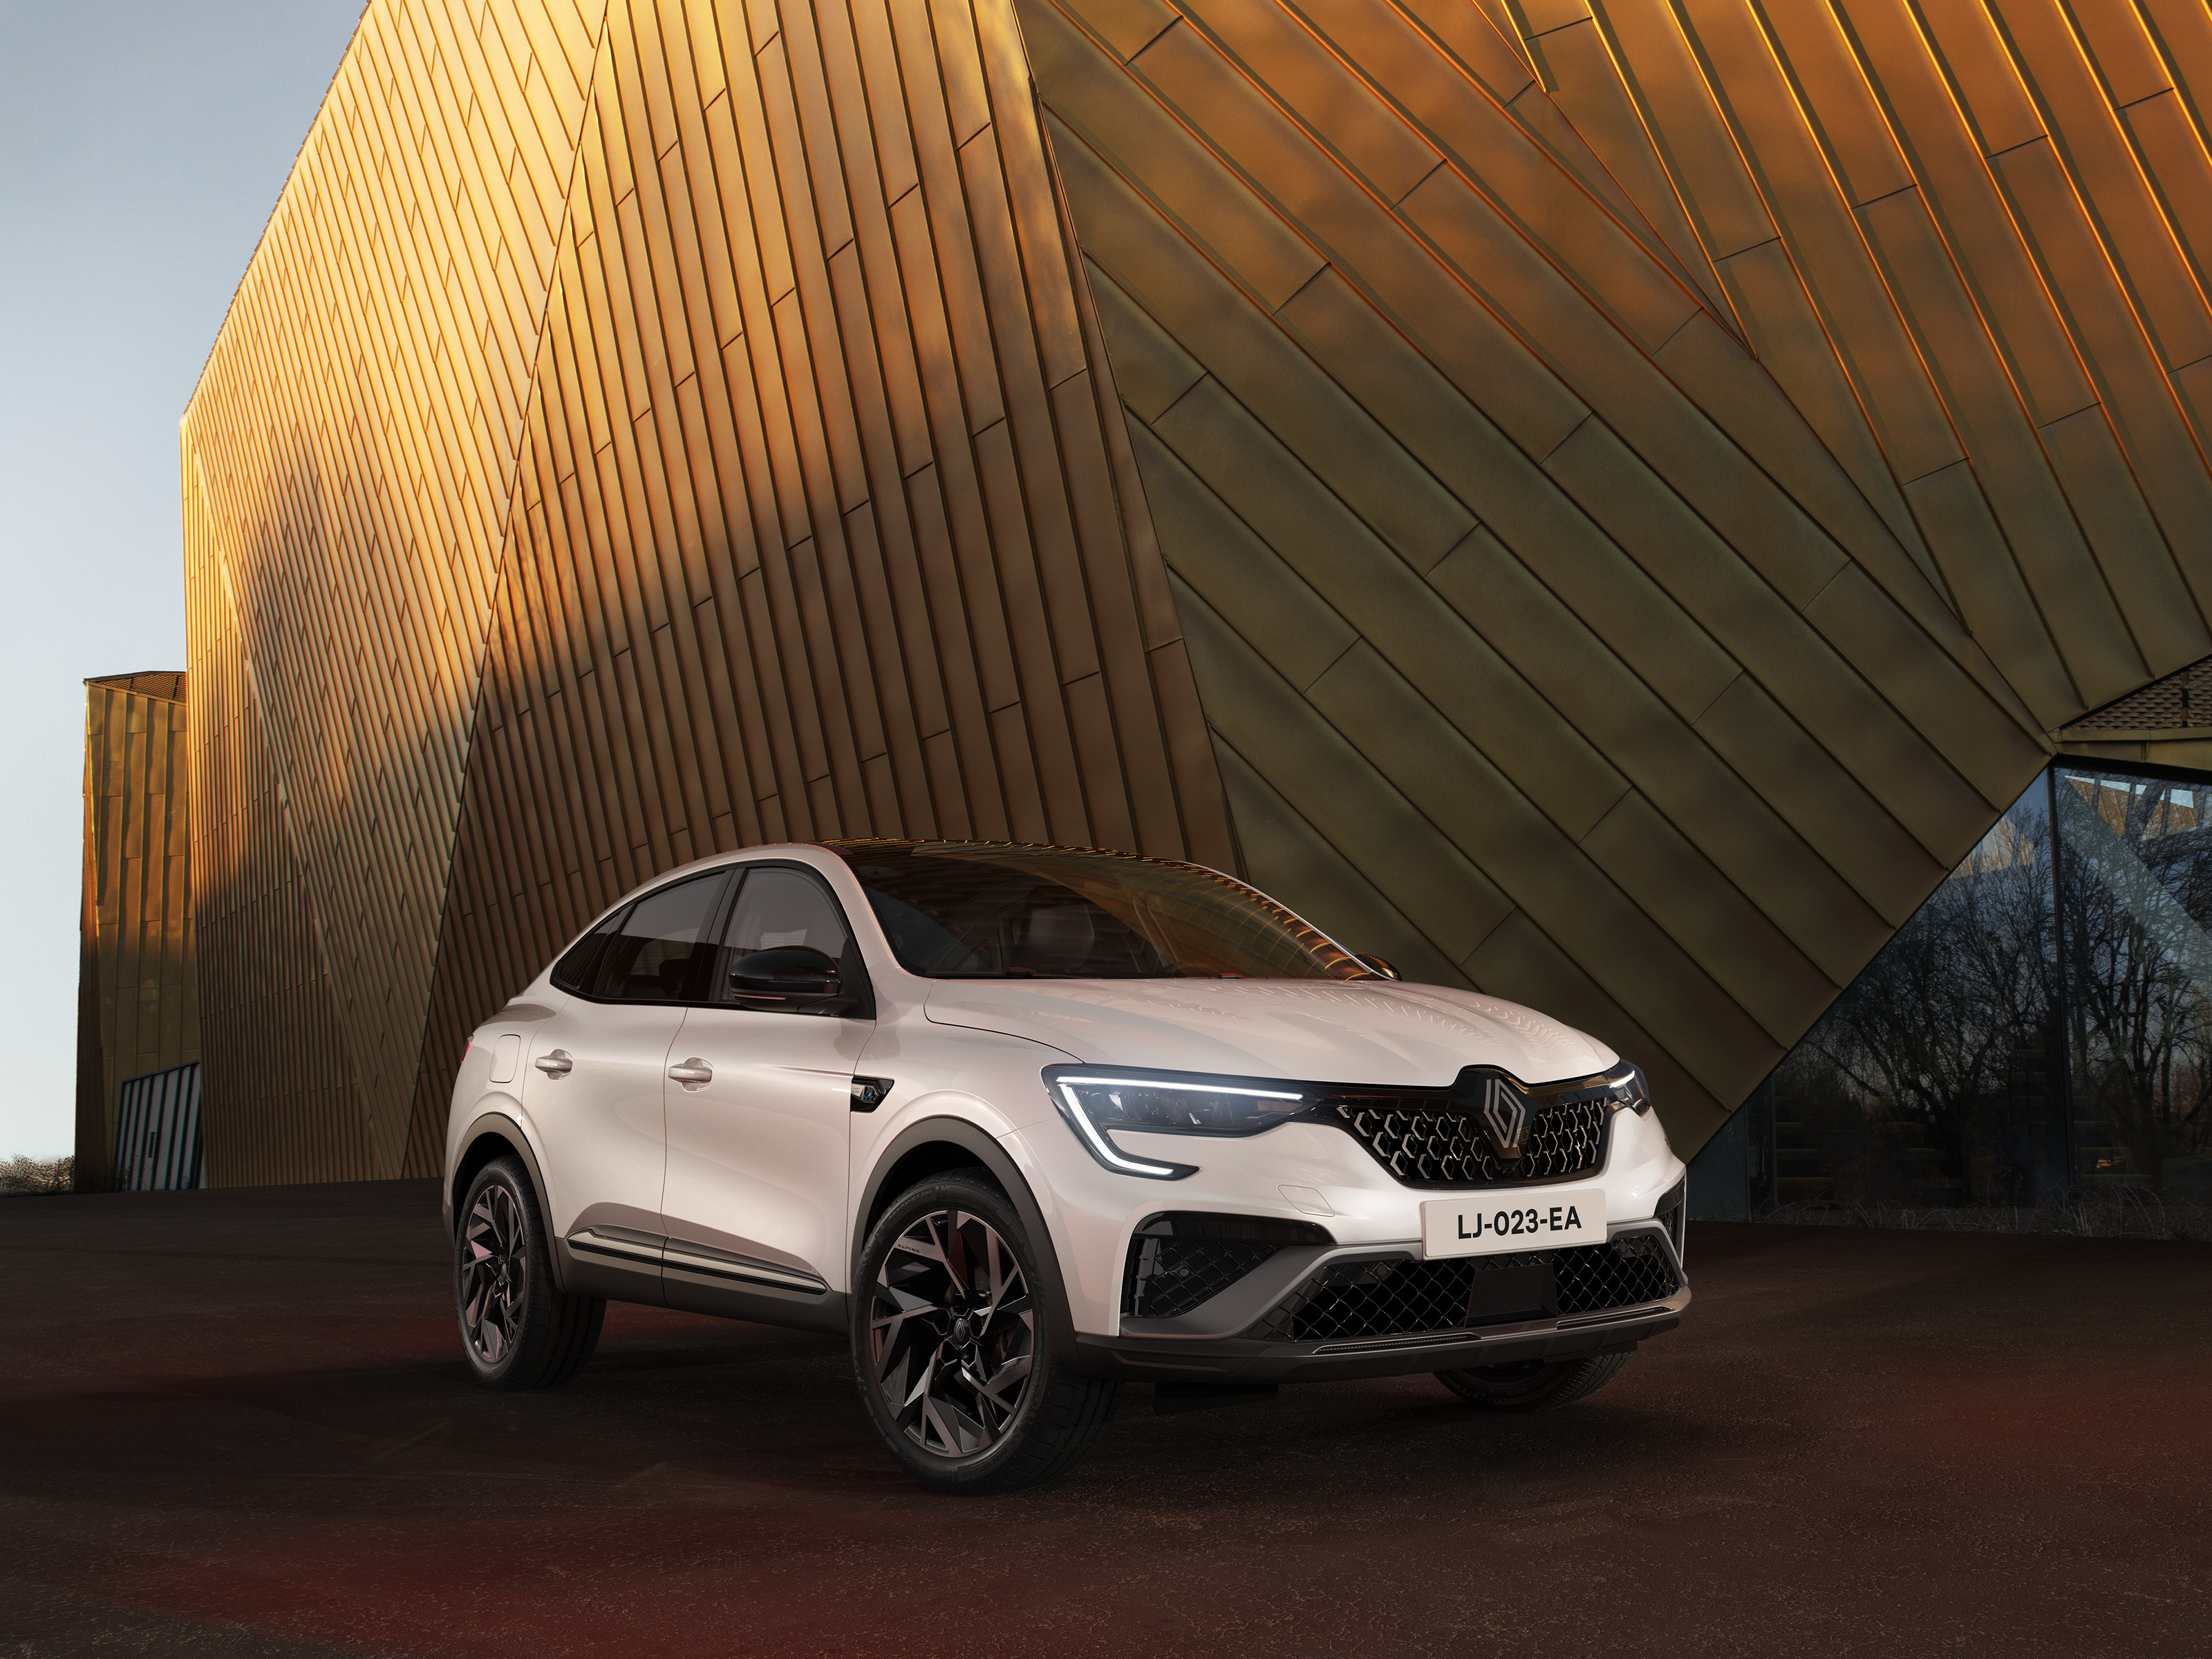 The New Renault Arkana: more “Nouvelle Vague” than ever - Site